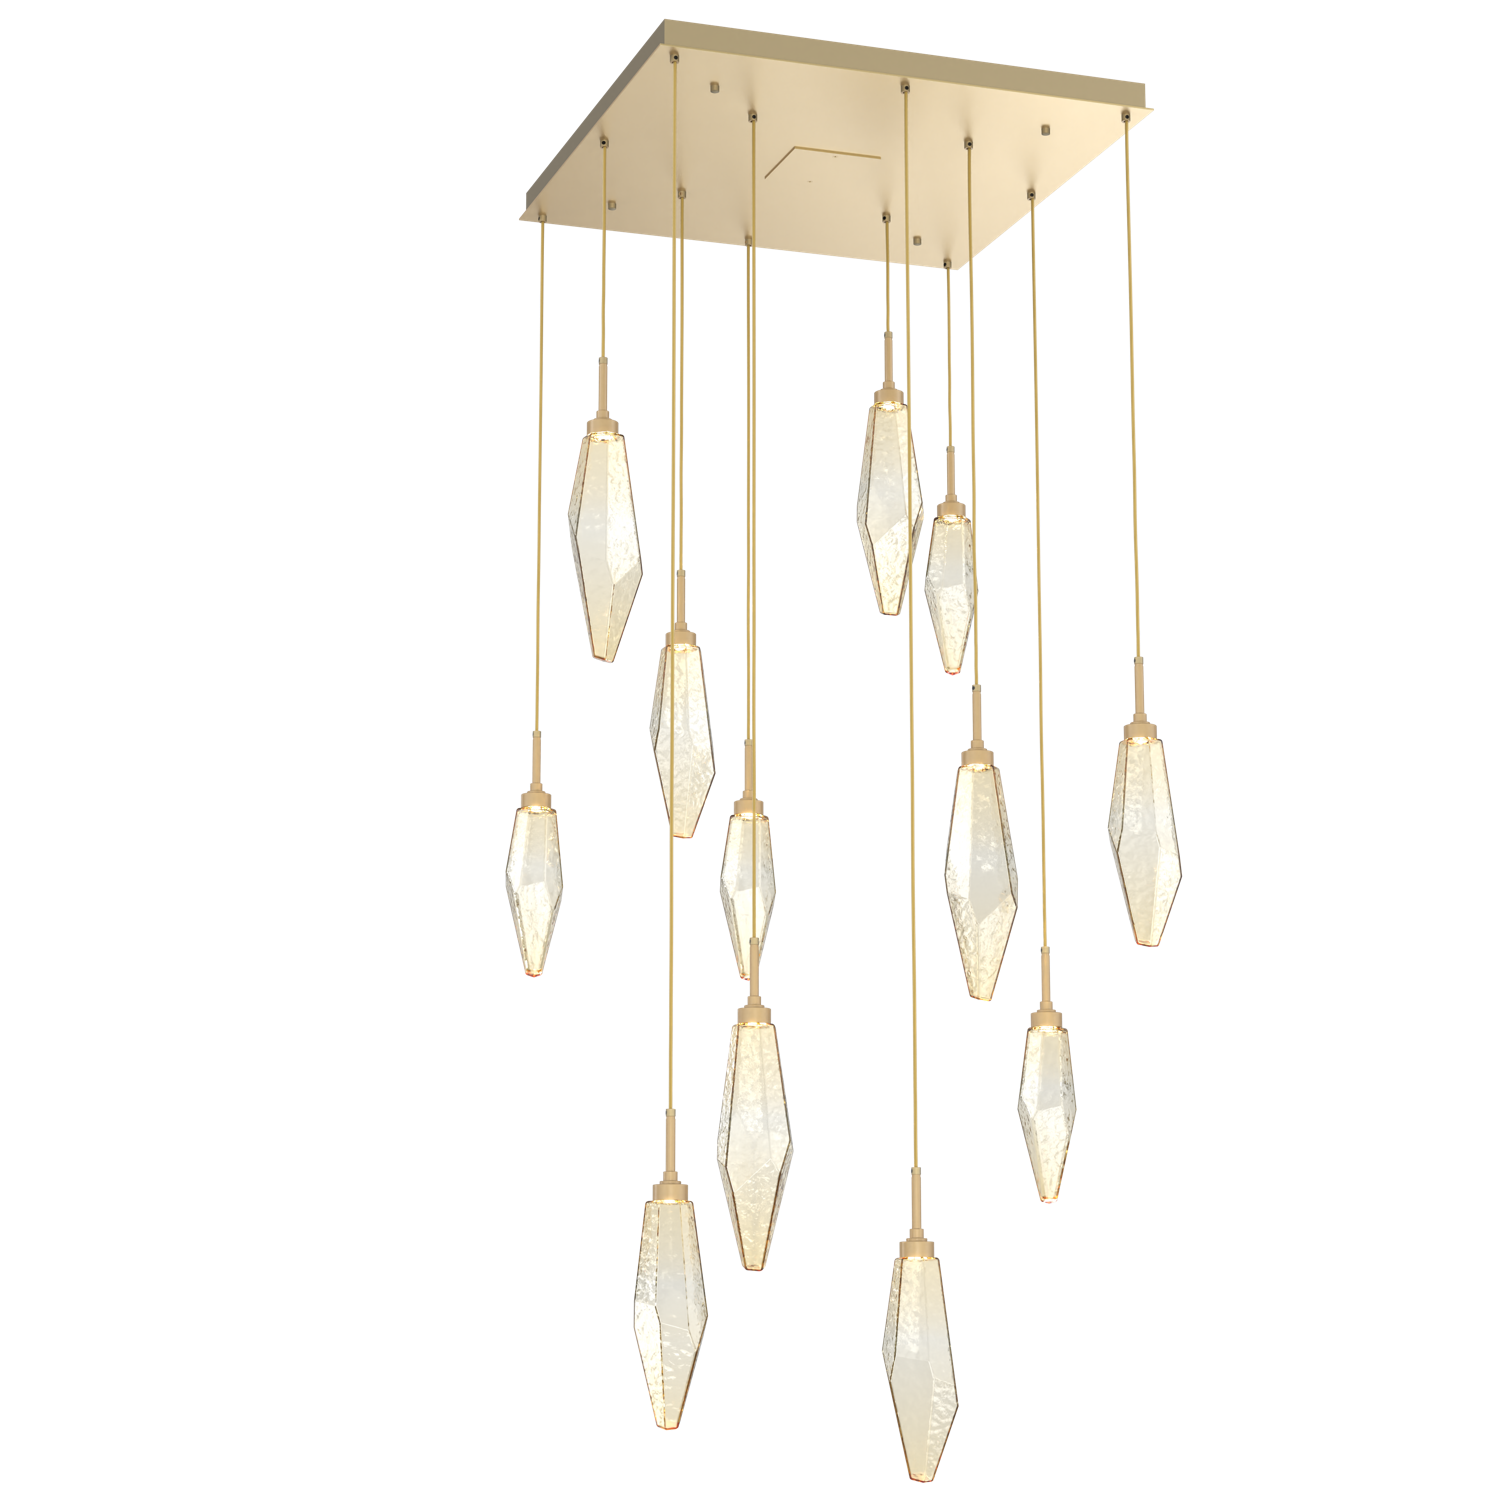 CHB0050-12-GB-CA-Hammerton-Studio-Rock-Crystal-12-light-square-pendant-chandelier-with-gilded-brass-finish-and-chilled-amber-blown-glass-shades-and-LED-lamping